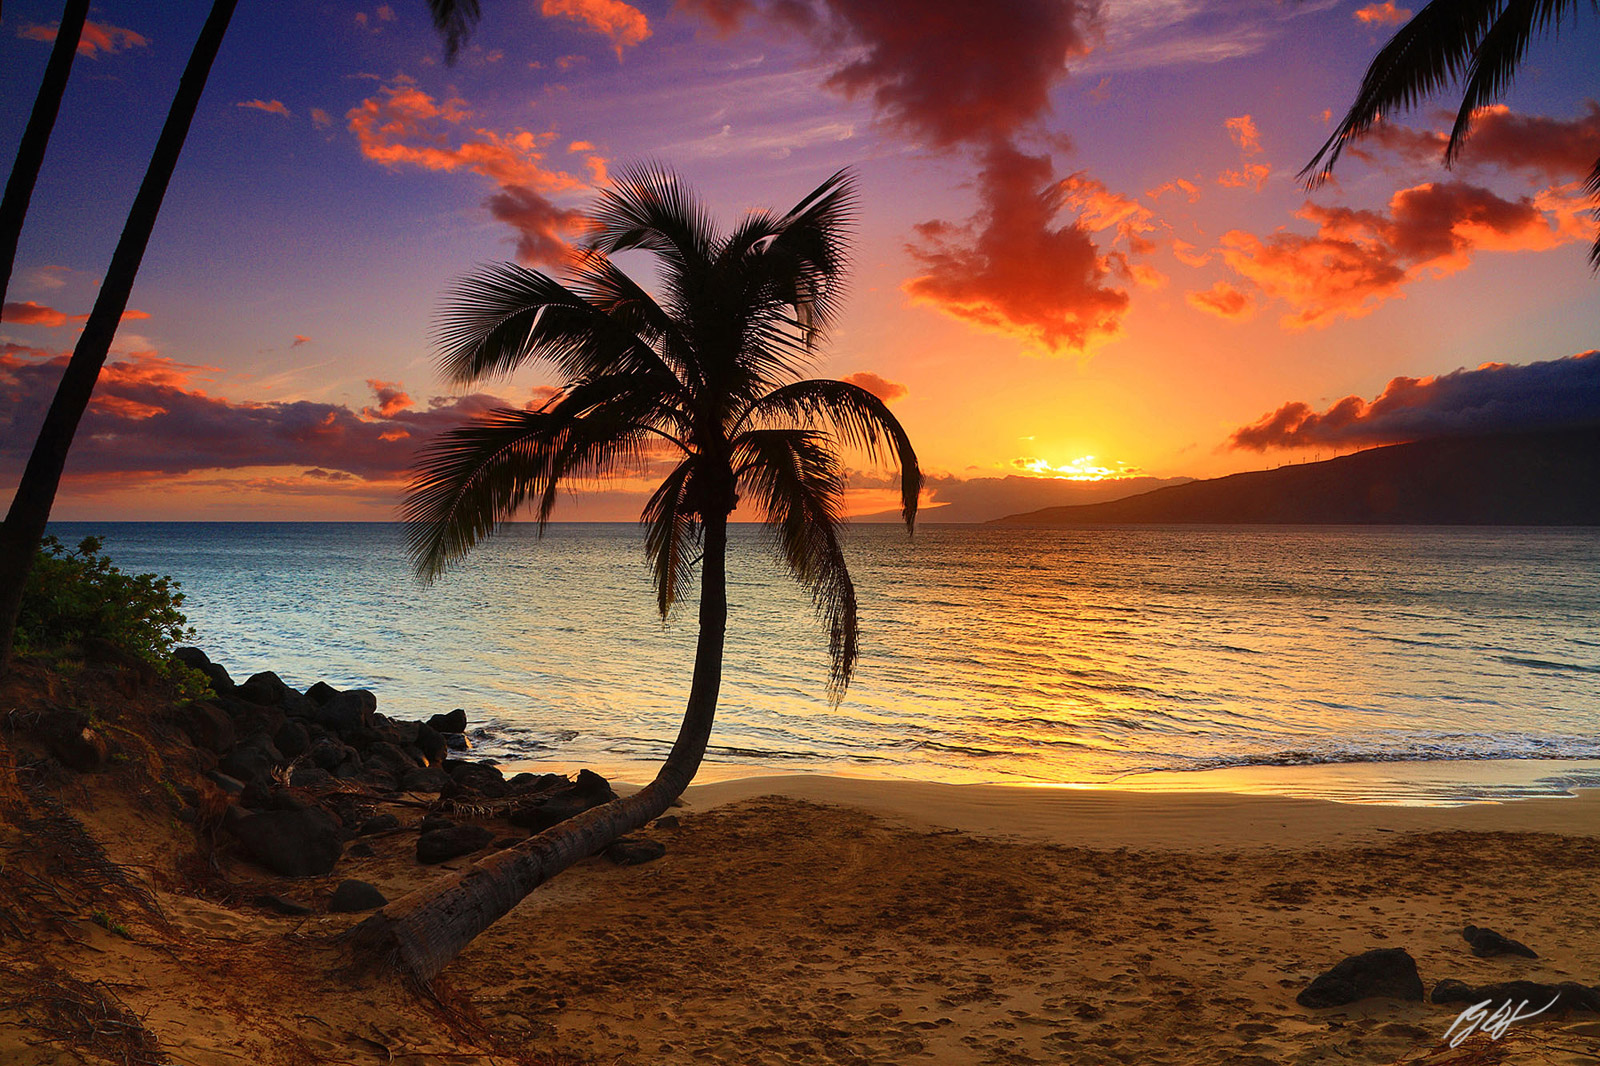 Palm Tee at Sunset from Kihei on the Island of Maui